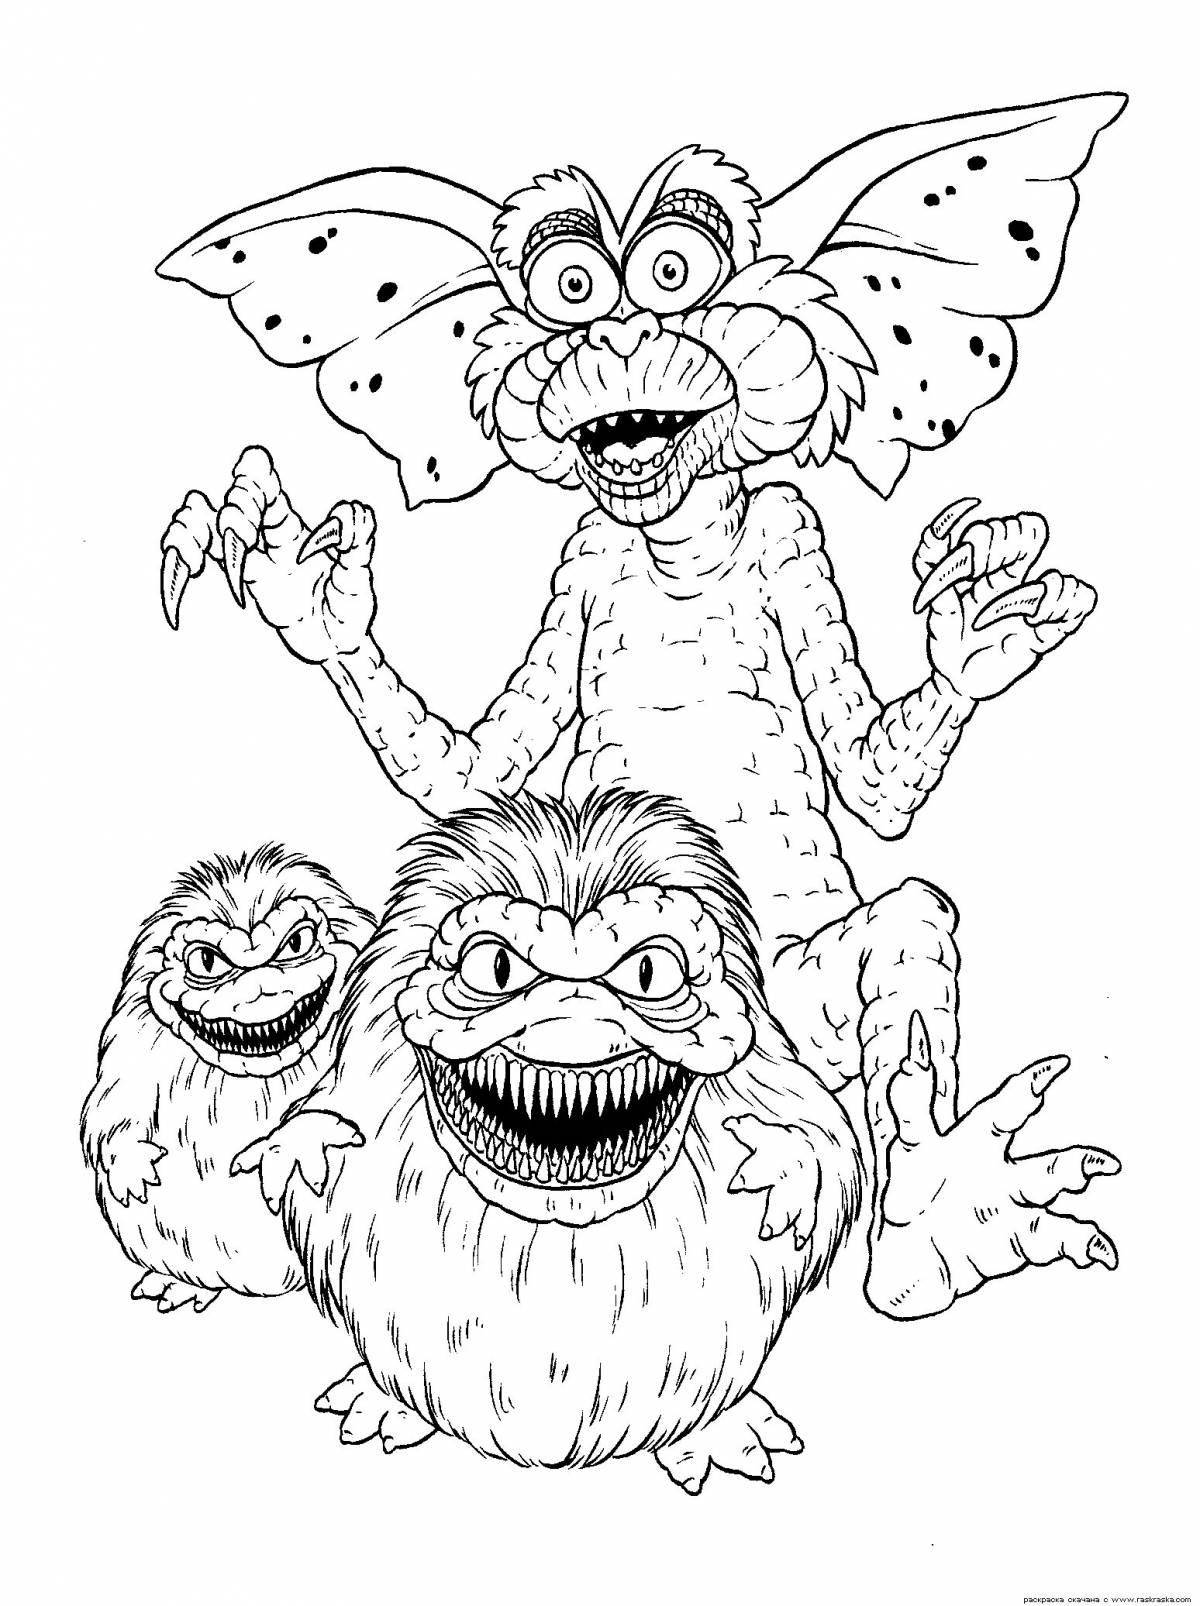 Colorful gizmo coloring page